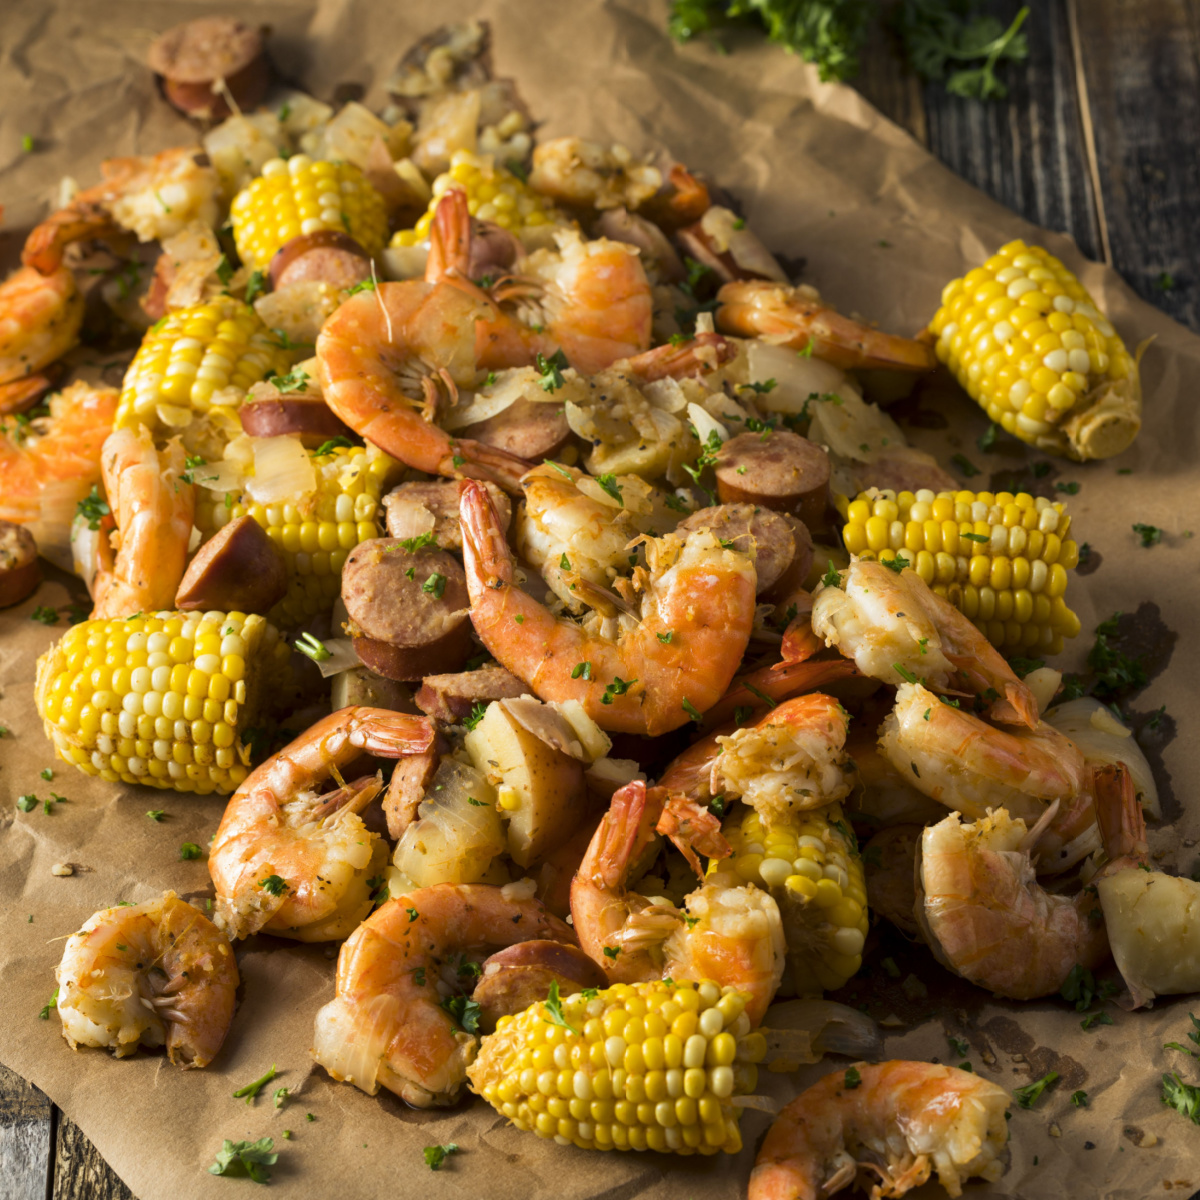 Shrimp Boil Recipe For Two - An Easy 30 Minute Meal - icook for two